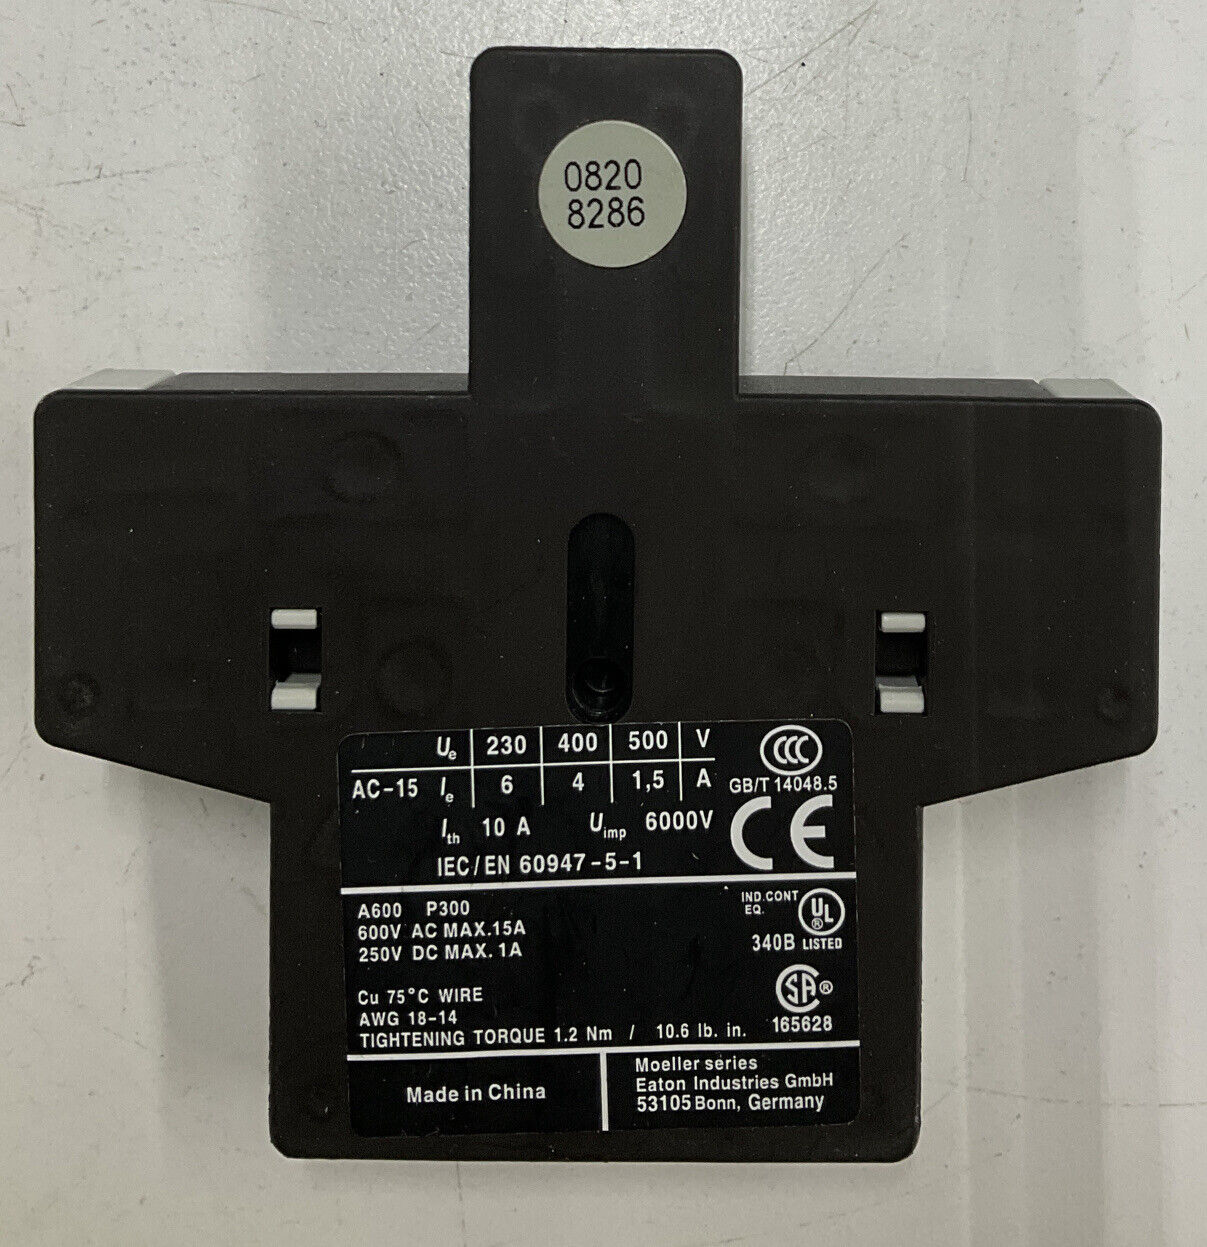 Eaton XTCEXSBN11 N.O. Side Mount Auxiliary (BL255)